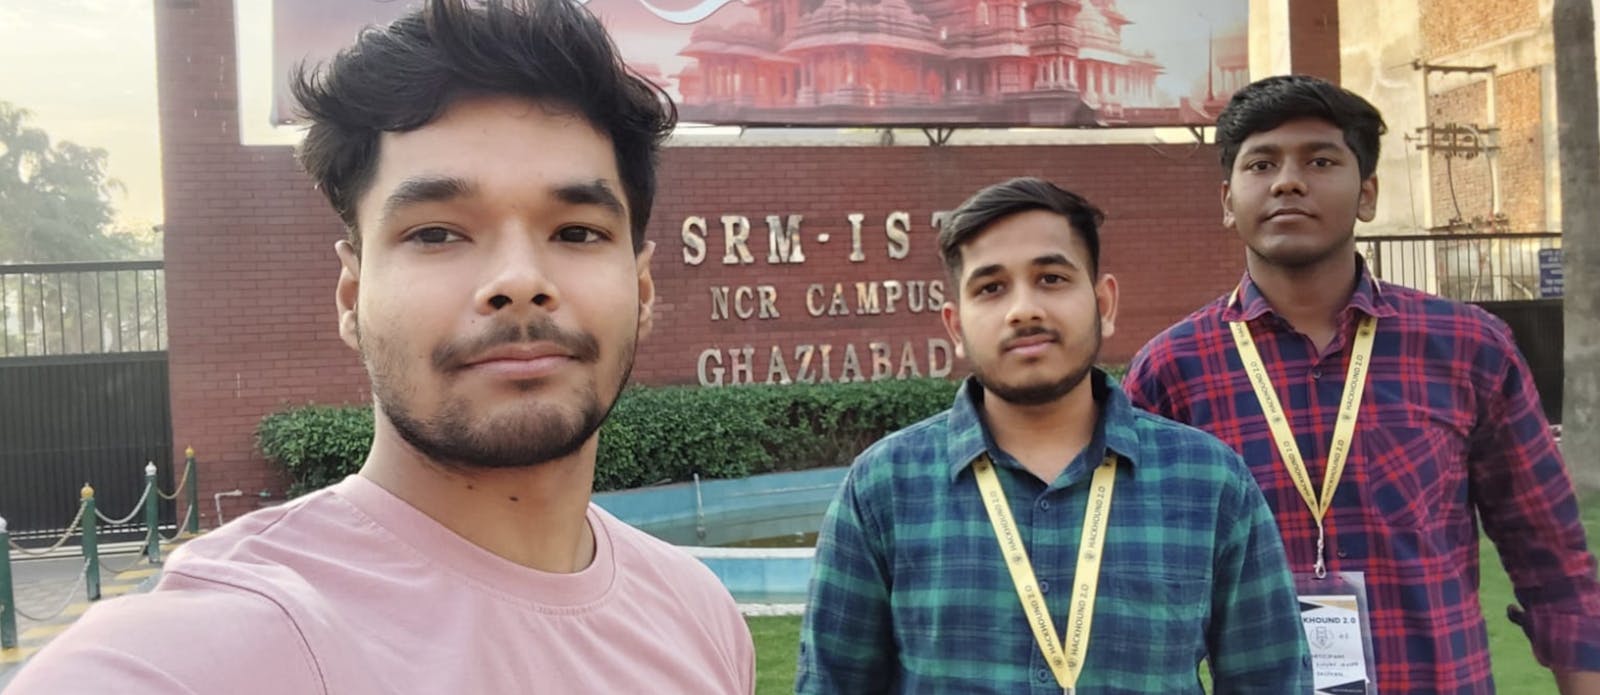 Pushing Boundaries: My Journey from Sleep Deprivation to Success at SRM University Hackathon